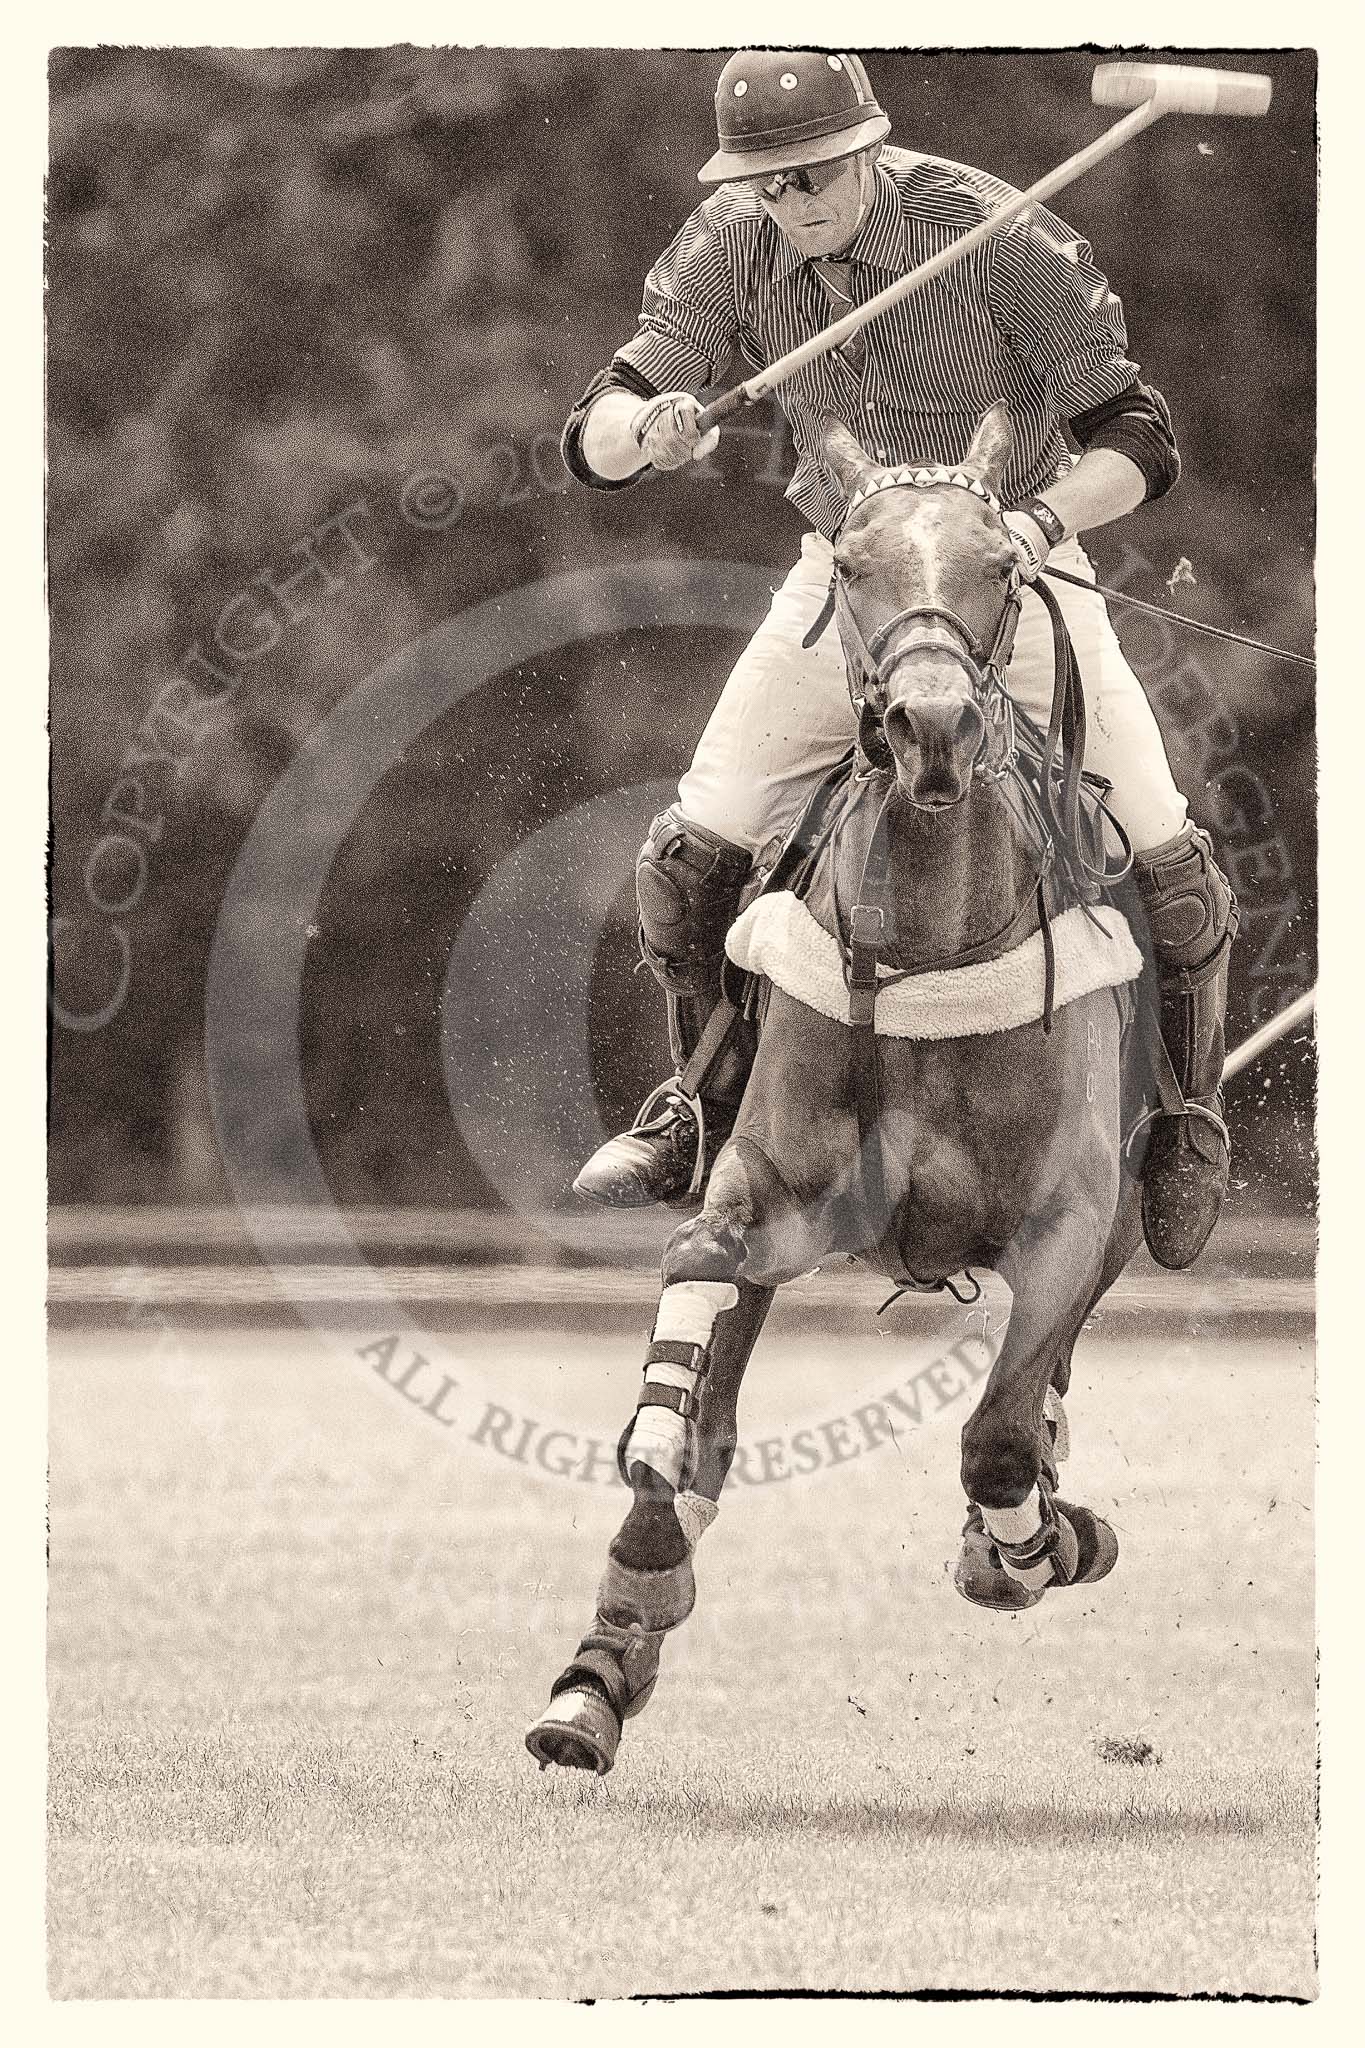 7th Heritage Polo Cup finals: Henry Fisher - Best Player of the 7th HERITAGE POLO CUP 2012..
Hurtwood Park Polo Club,
Ewhurst Green,
Surrey,
United Kingdom,
on 05 August 2012 at 13:36, image #32